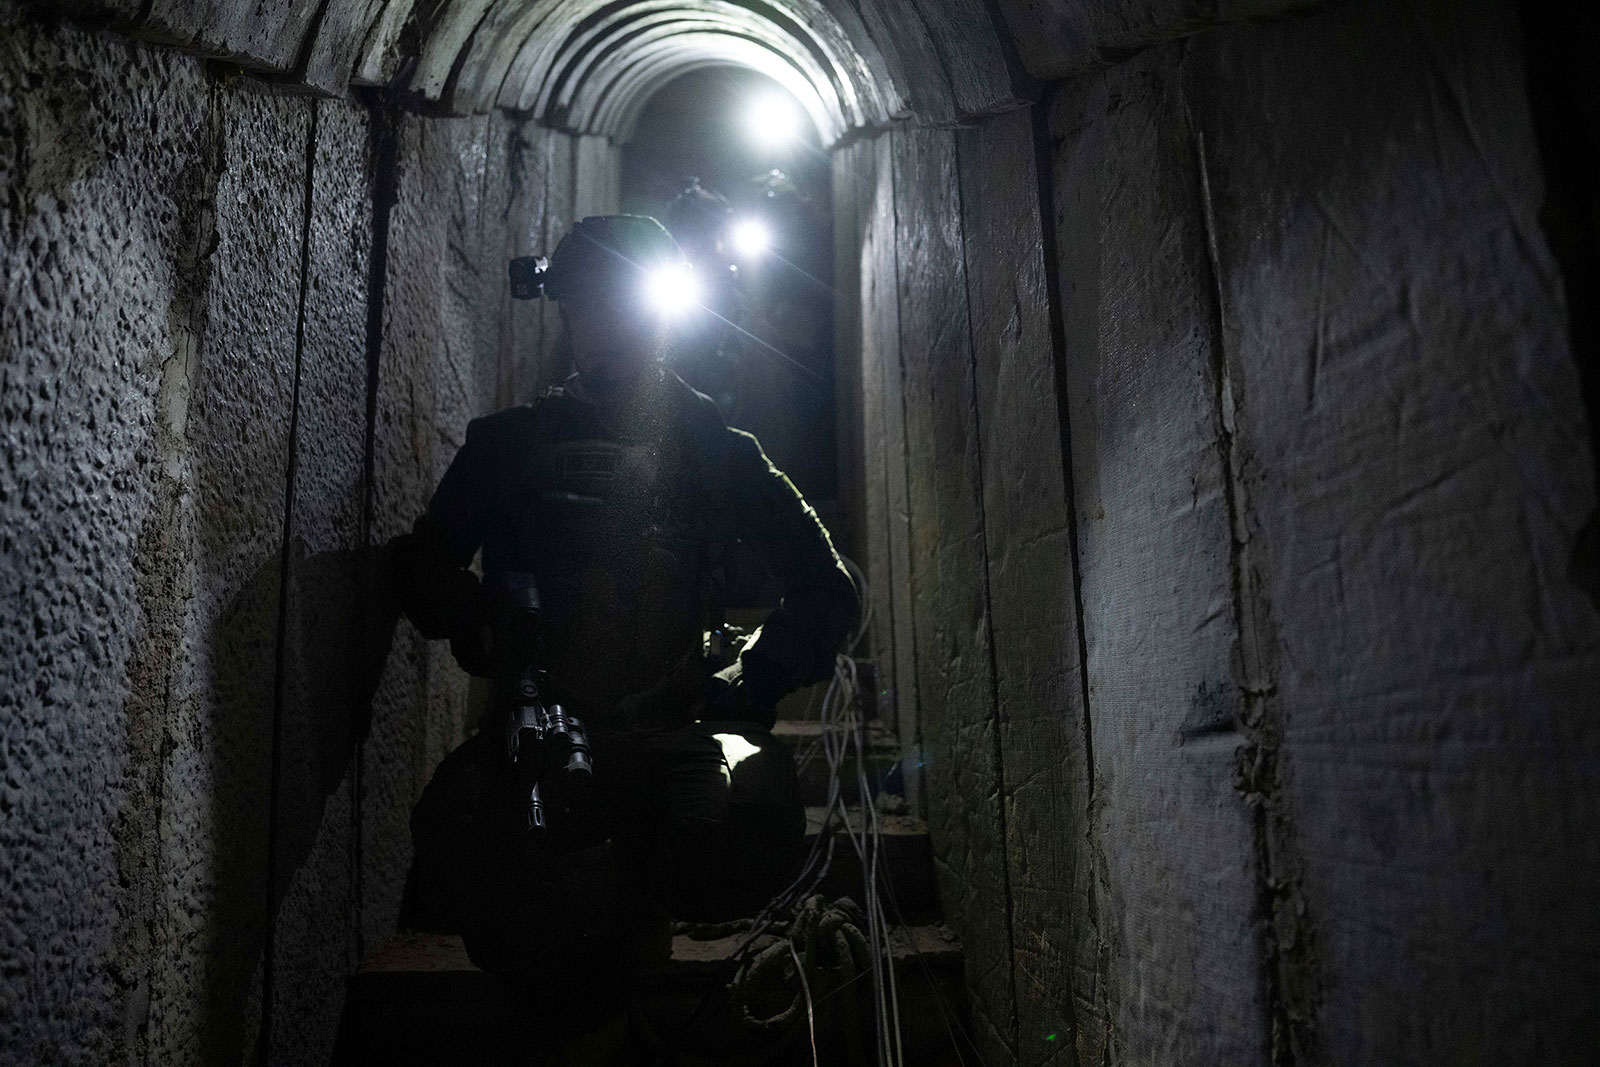 Israeli soldiers show journalists an underground tunnel where the Israeli military claims it found evidence hostages were held by Hamas in Khan Younis, Gaza, on January 10.